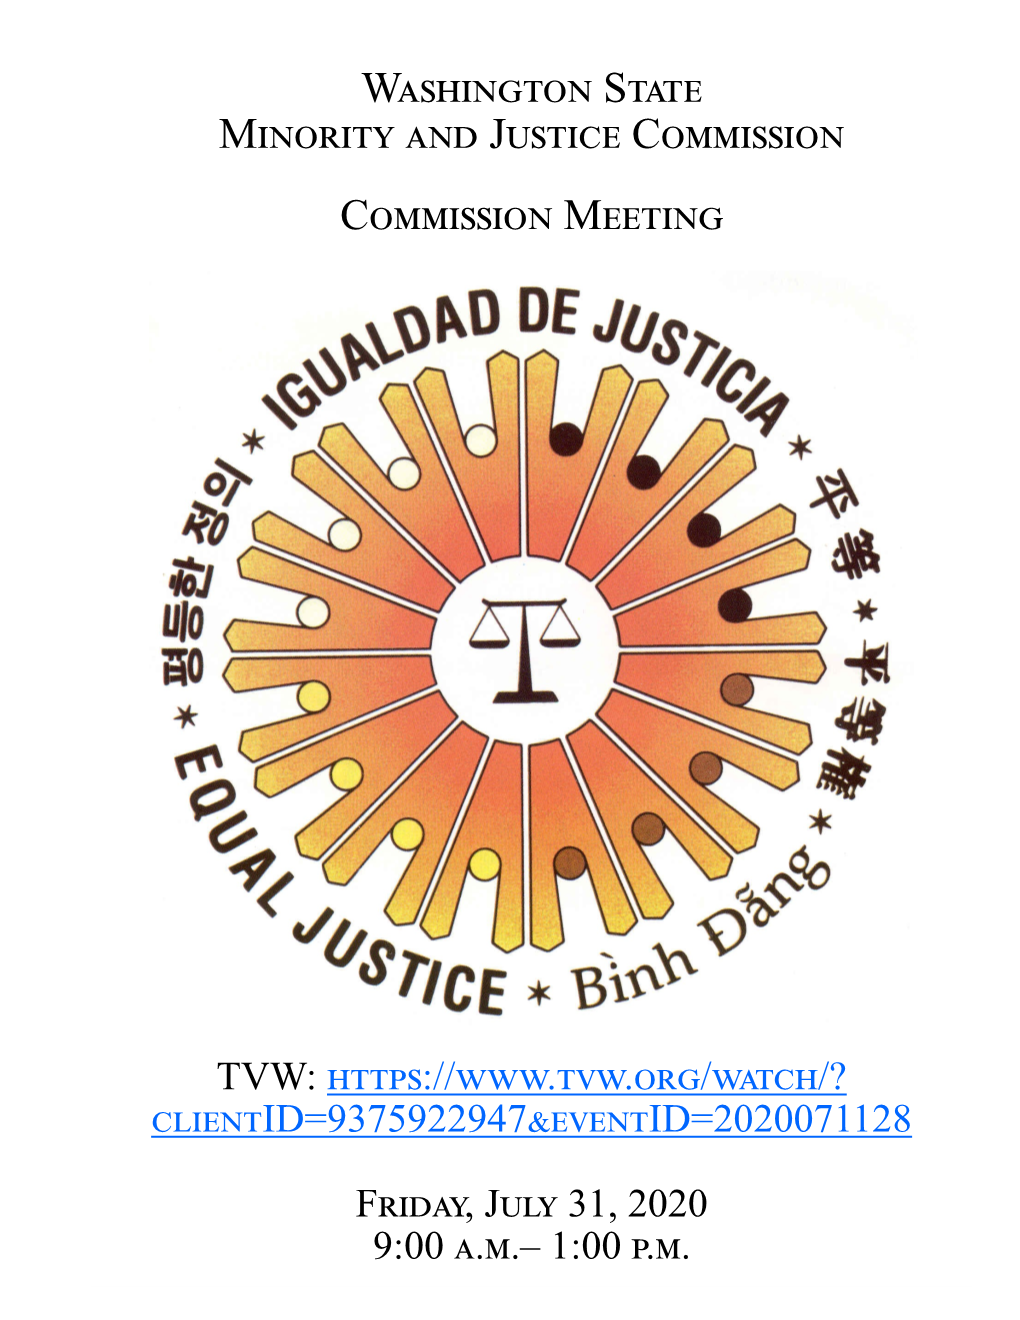 Washington State Minority and Justice Commission Commission Meeting